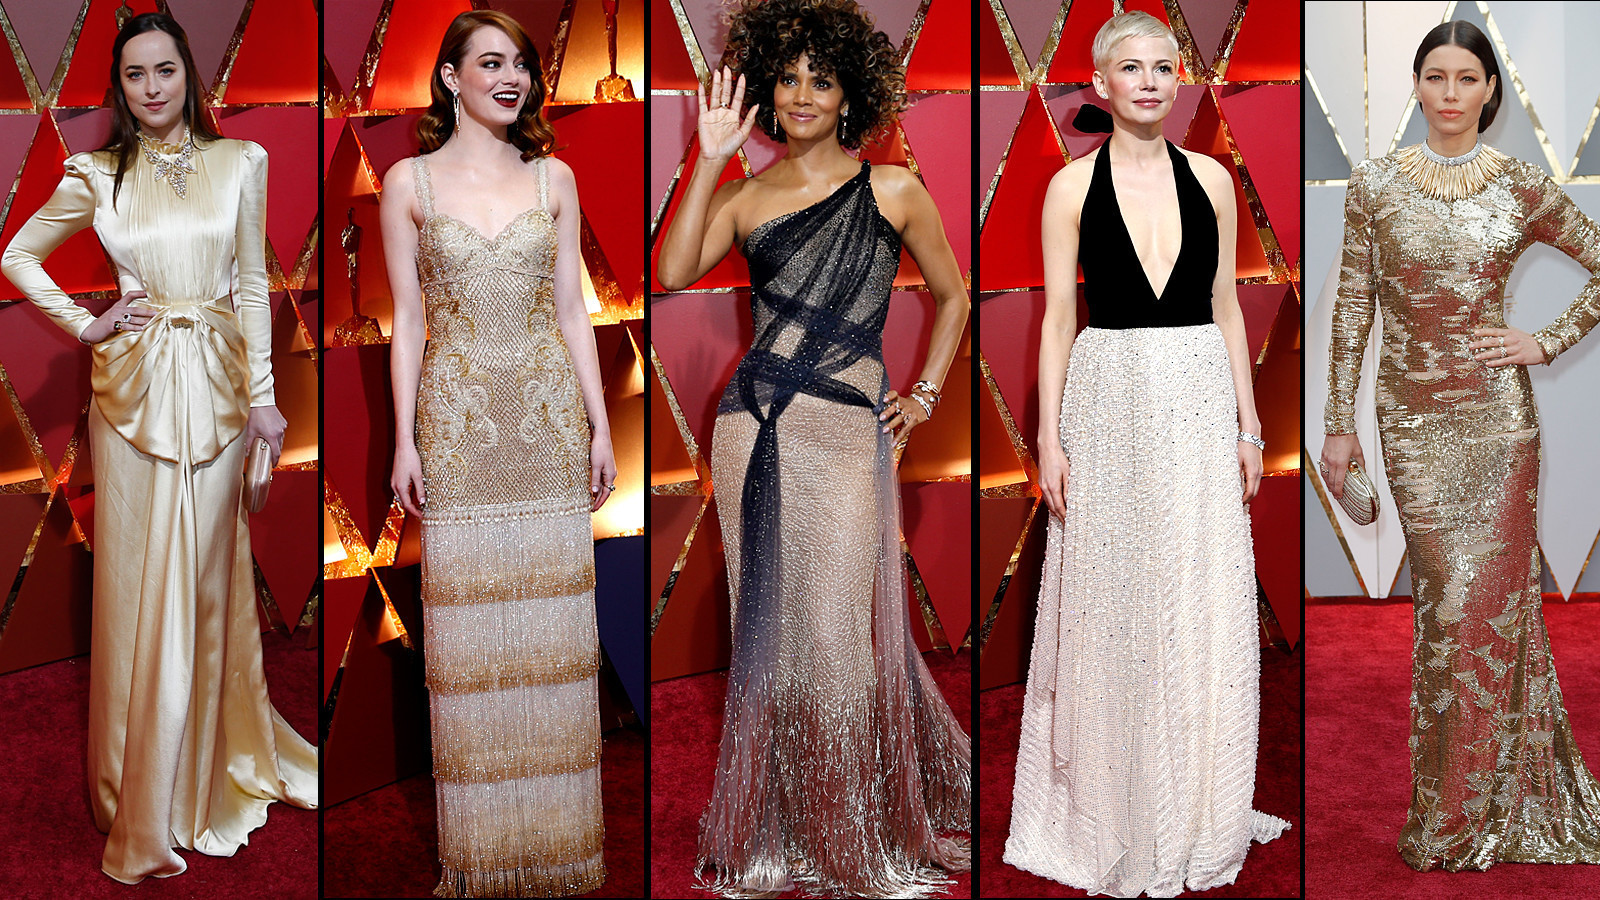 The Oscar gold standard goes fashion forward on the red carpet